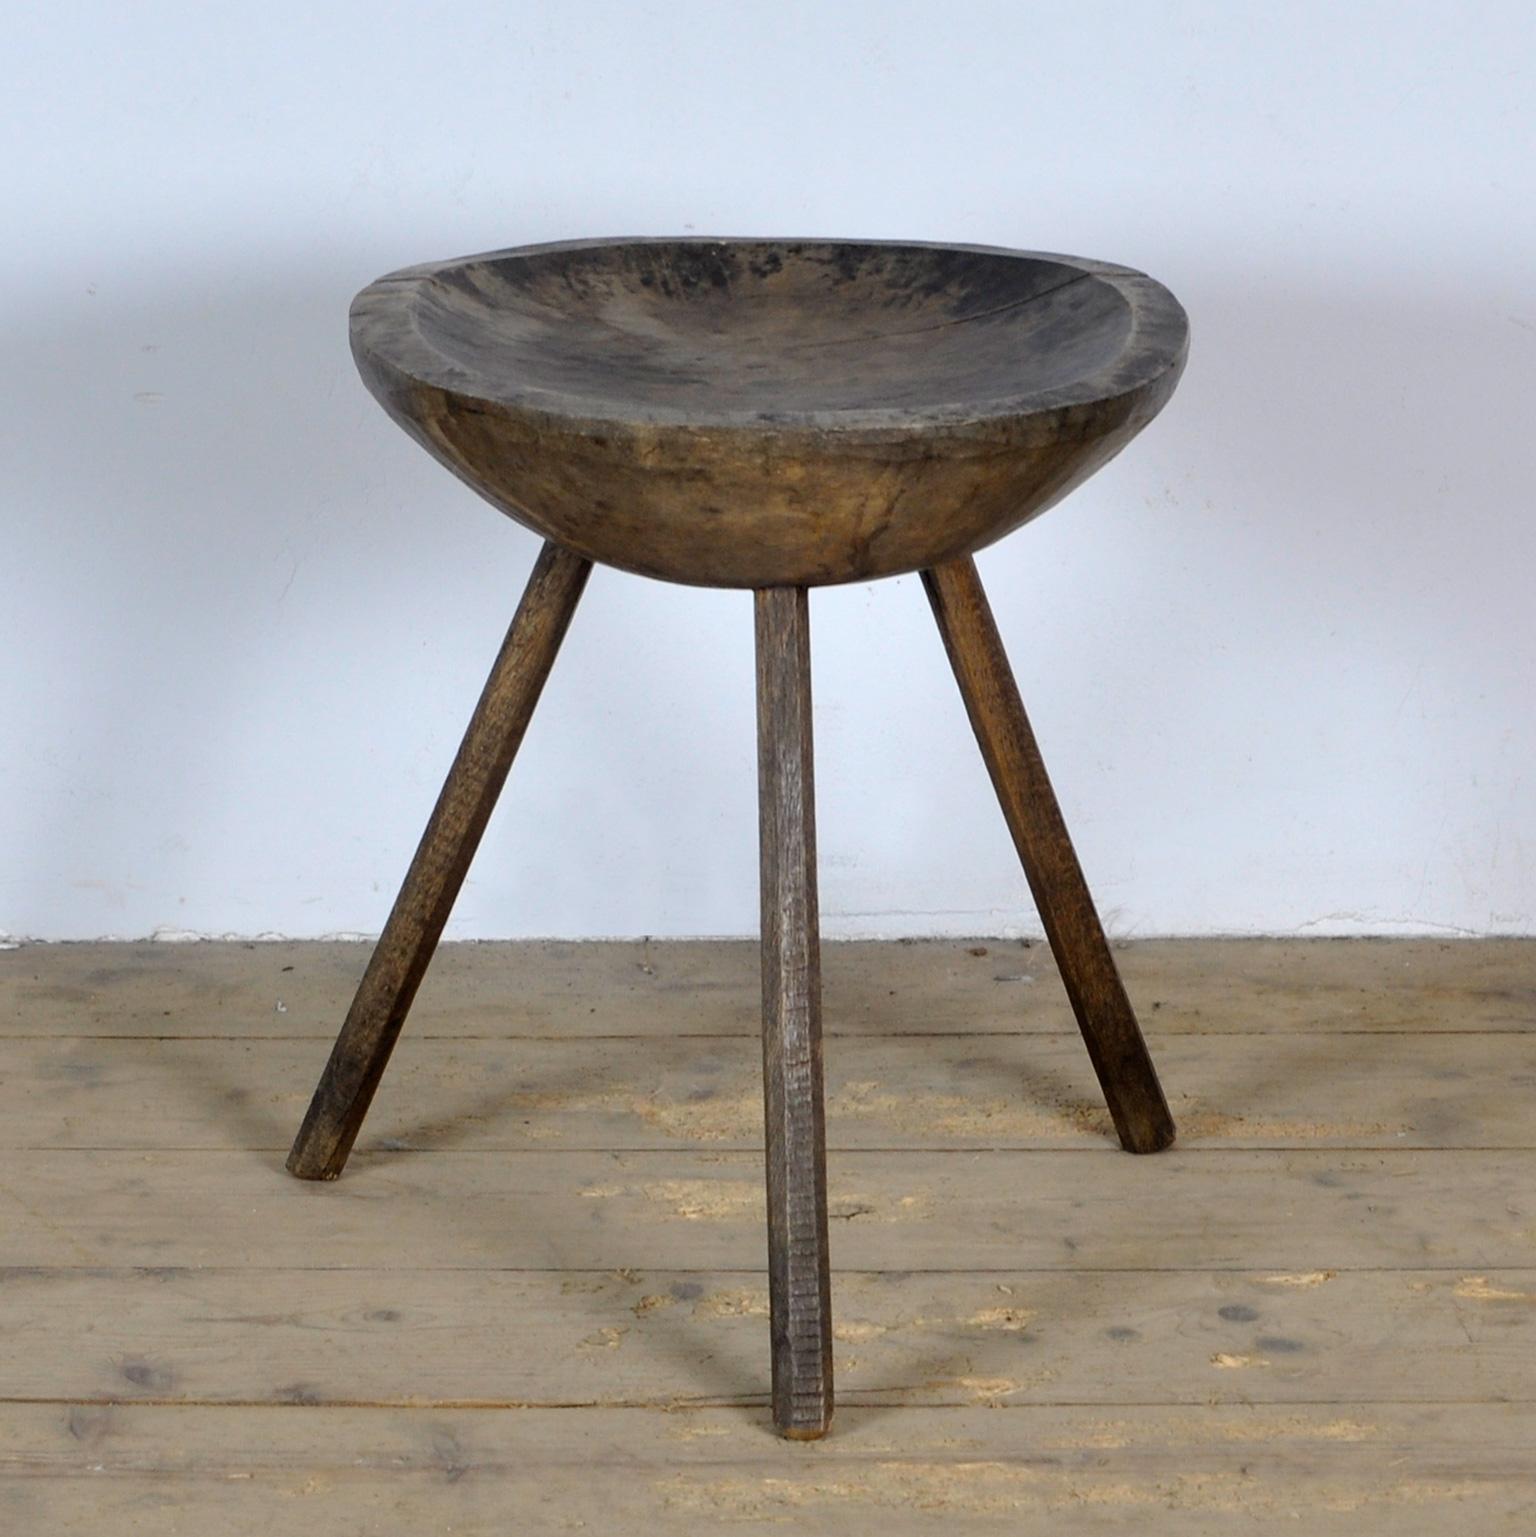 Original handmade folk art milking stool. Made in France, late 19th century. Solid oak stool with tripods so that the stool is never unstable. Simple in design, with a hollowed out seat.